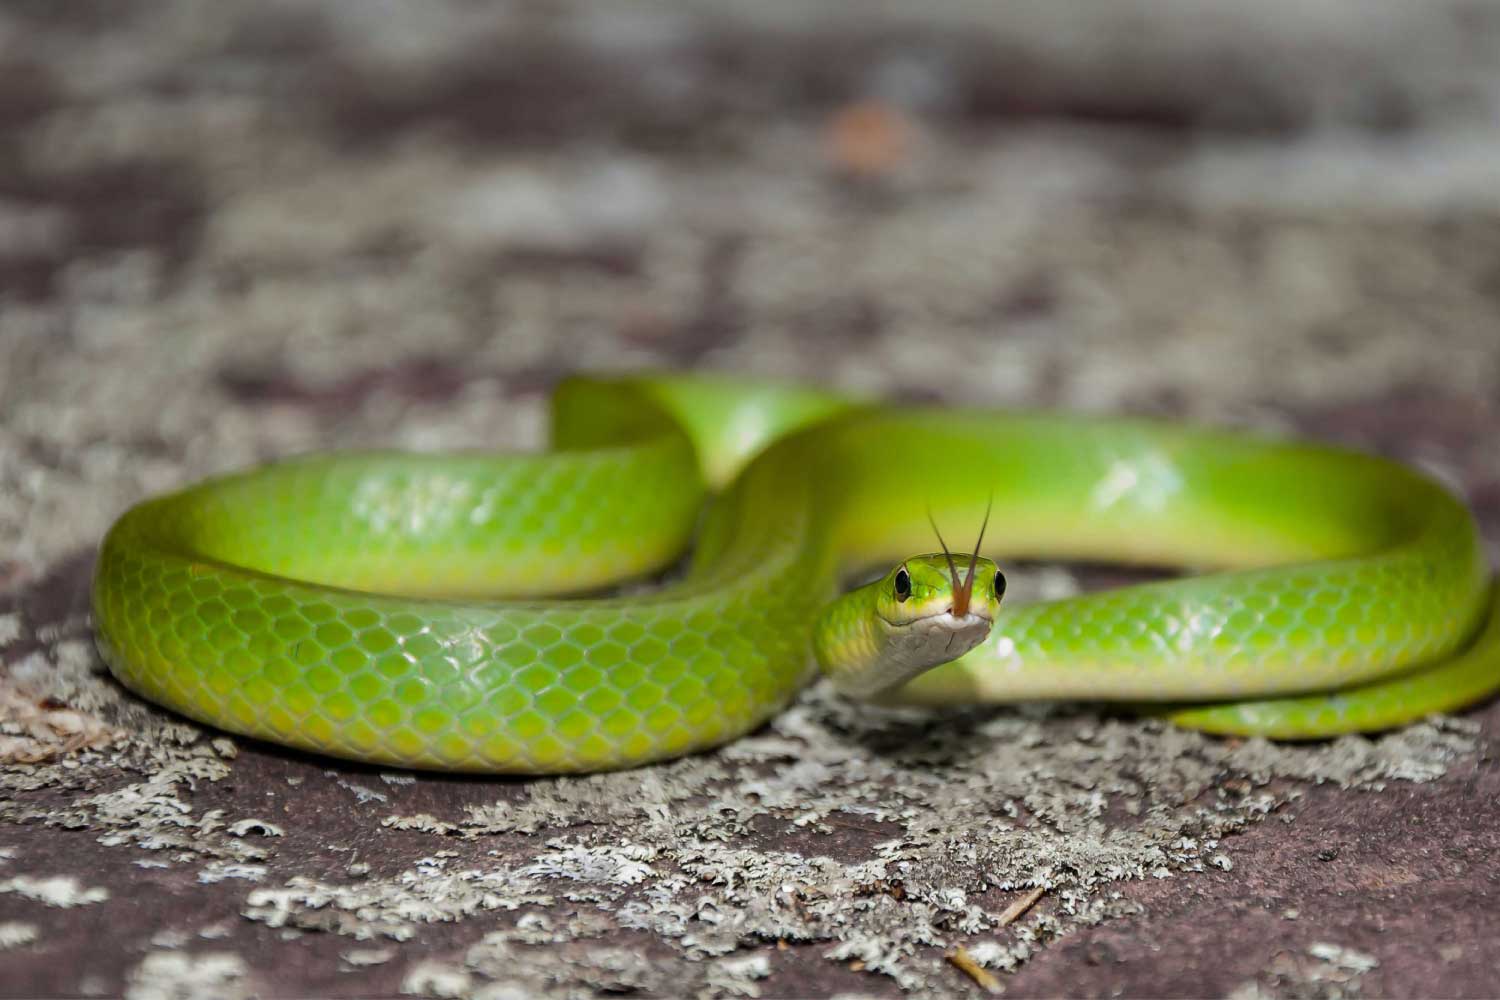 Nature curiosity: Why do snakes shed their skin? | Forest Preserve District  of Will County